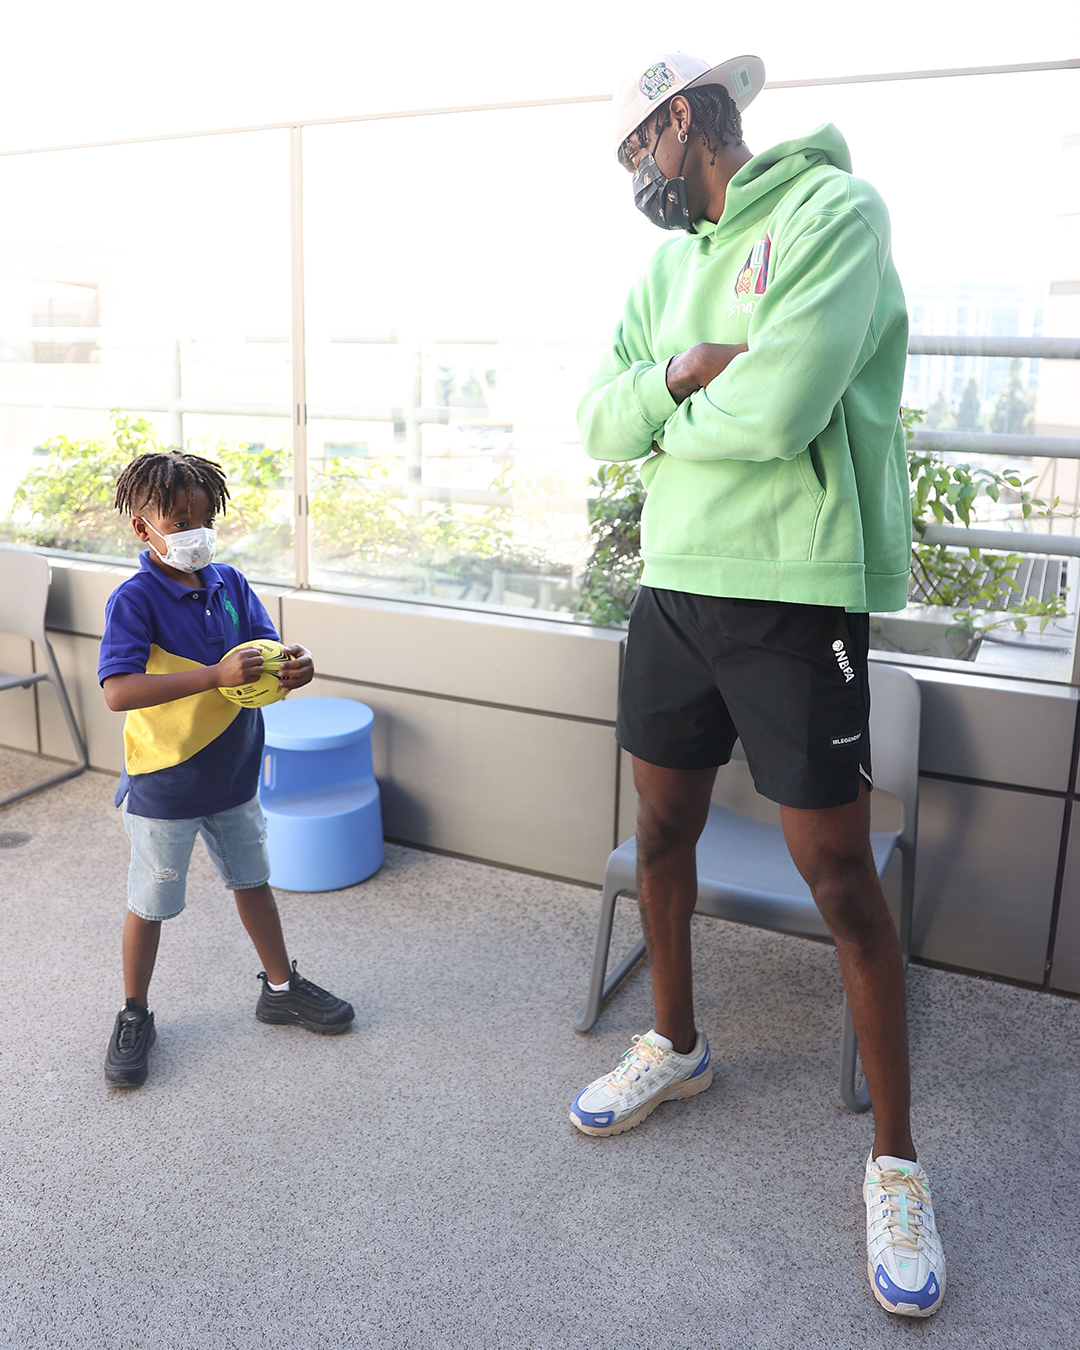 The Lakers and Lebron James took some time off the court to visit patients and their families at UCLAMCH